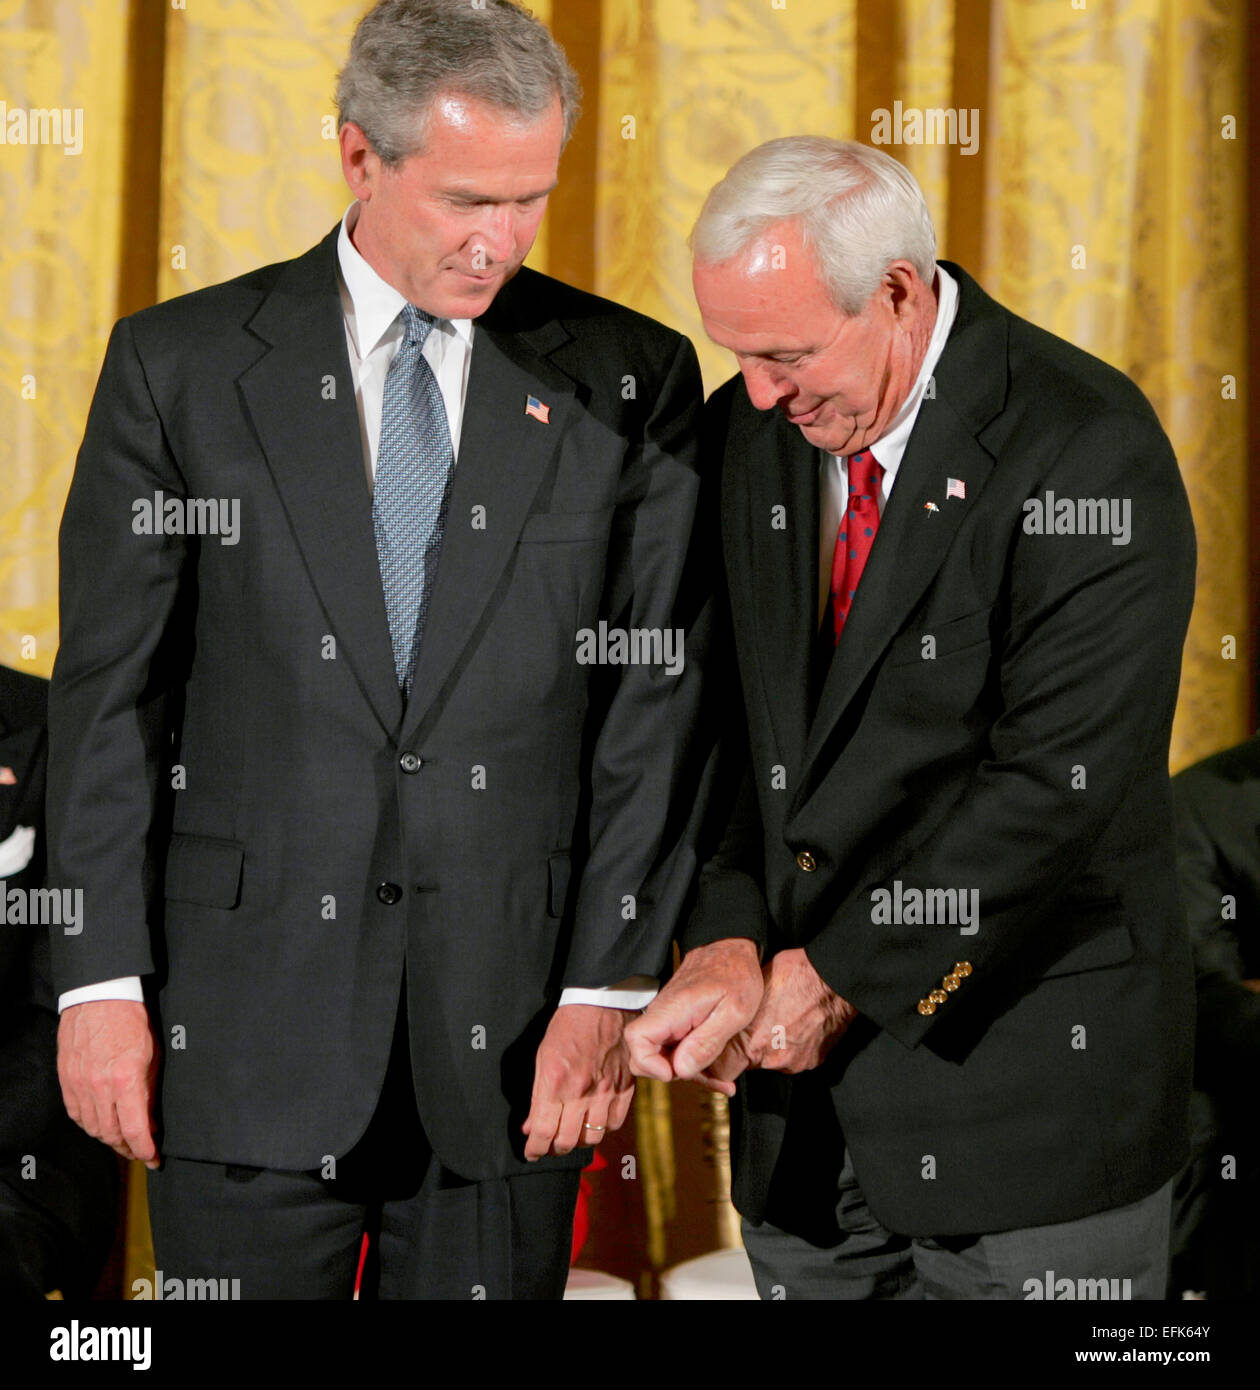 US President George W. Bush gets a golfing tip from Arnold Palmer during the Presidential Medal of Freedom Award Ceremony June 23, 2004 in Washington, DC. Stock Photo